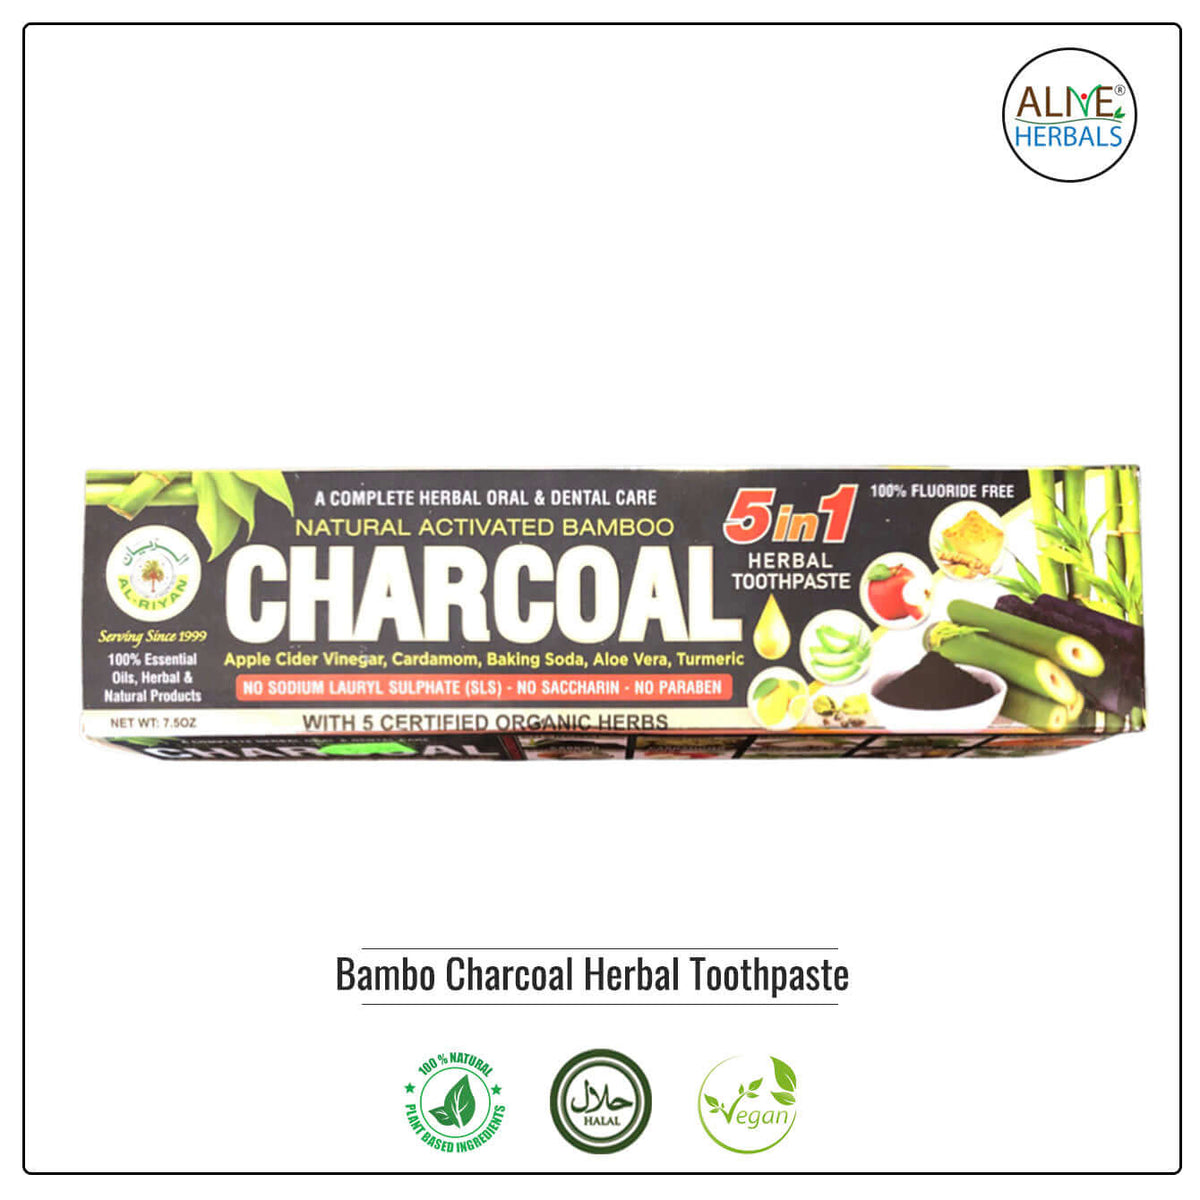 Bamboo Charcoal Herbal Toothpaste - Buy at Natural Food Store | Alive Herbals.